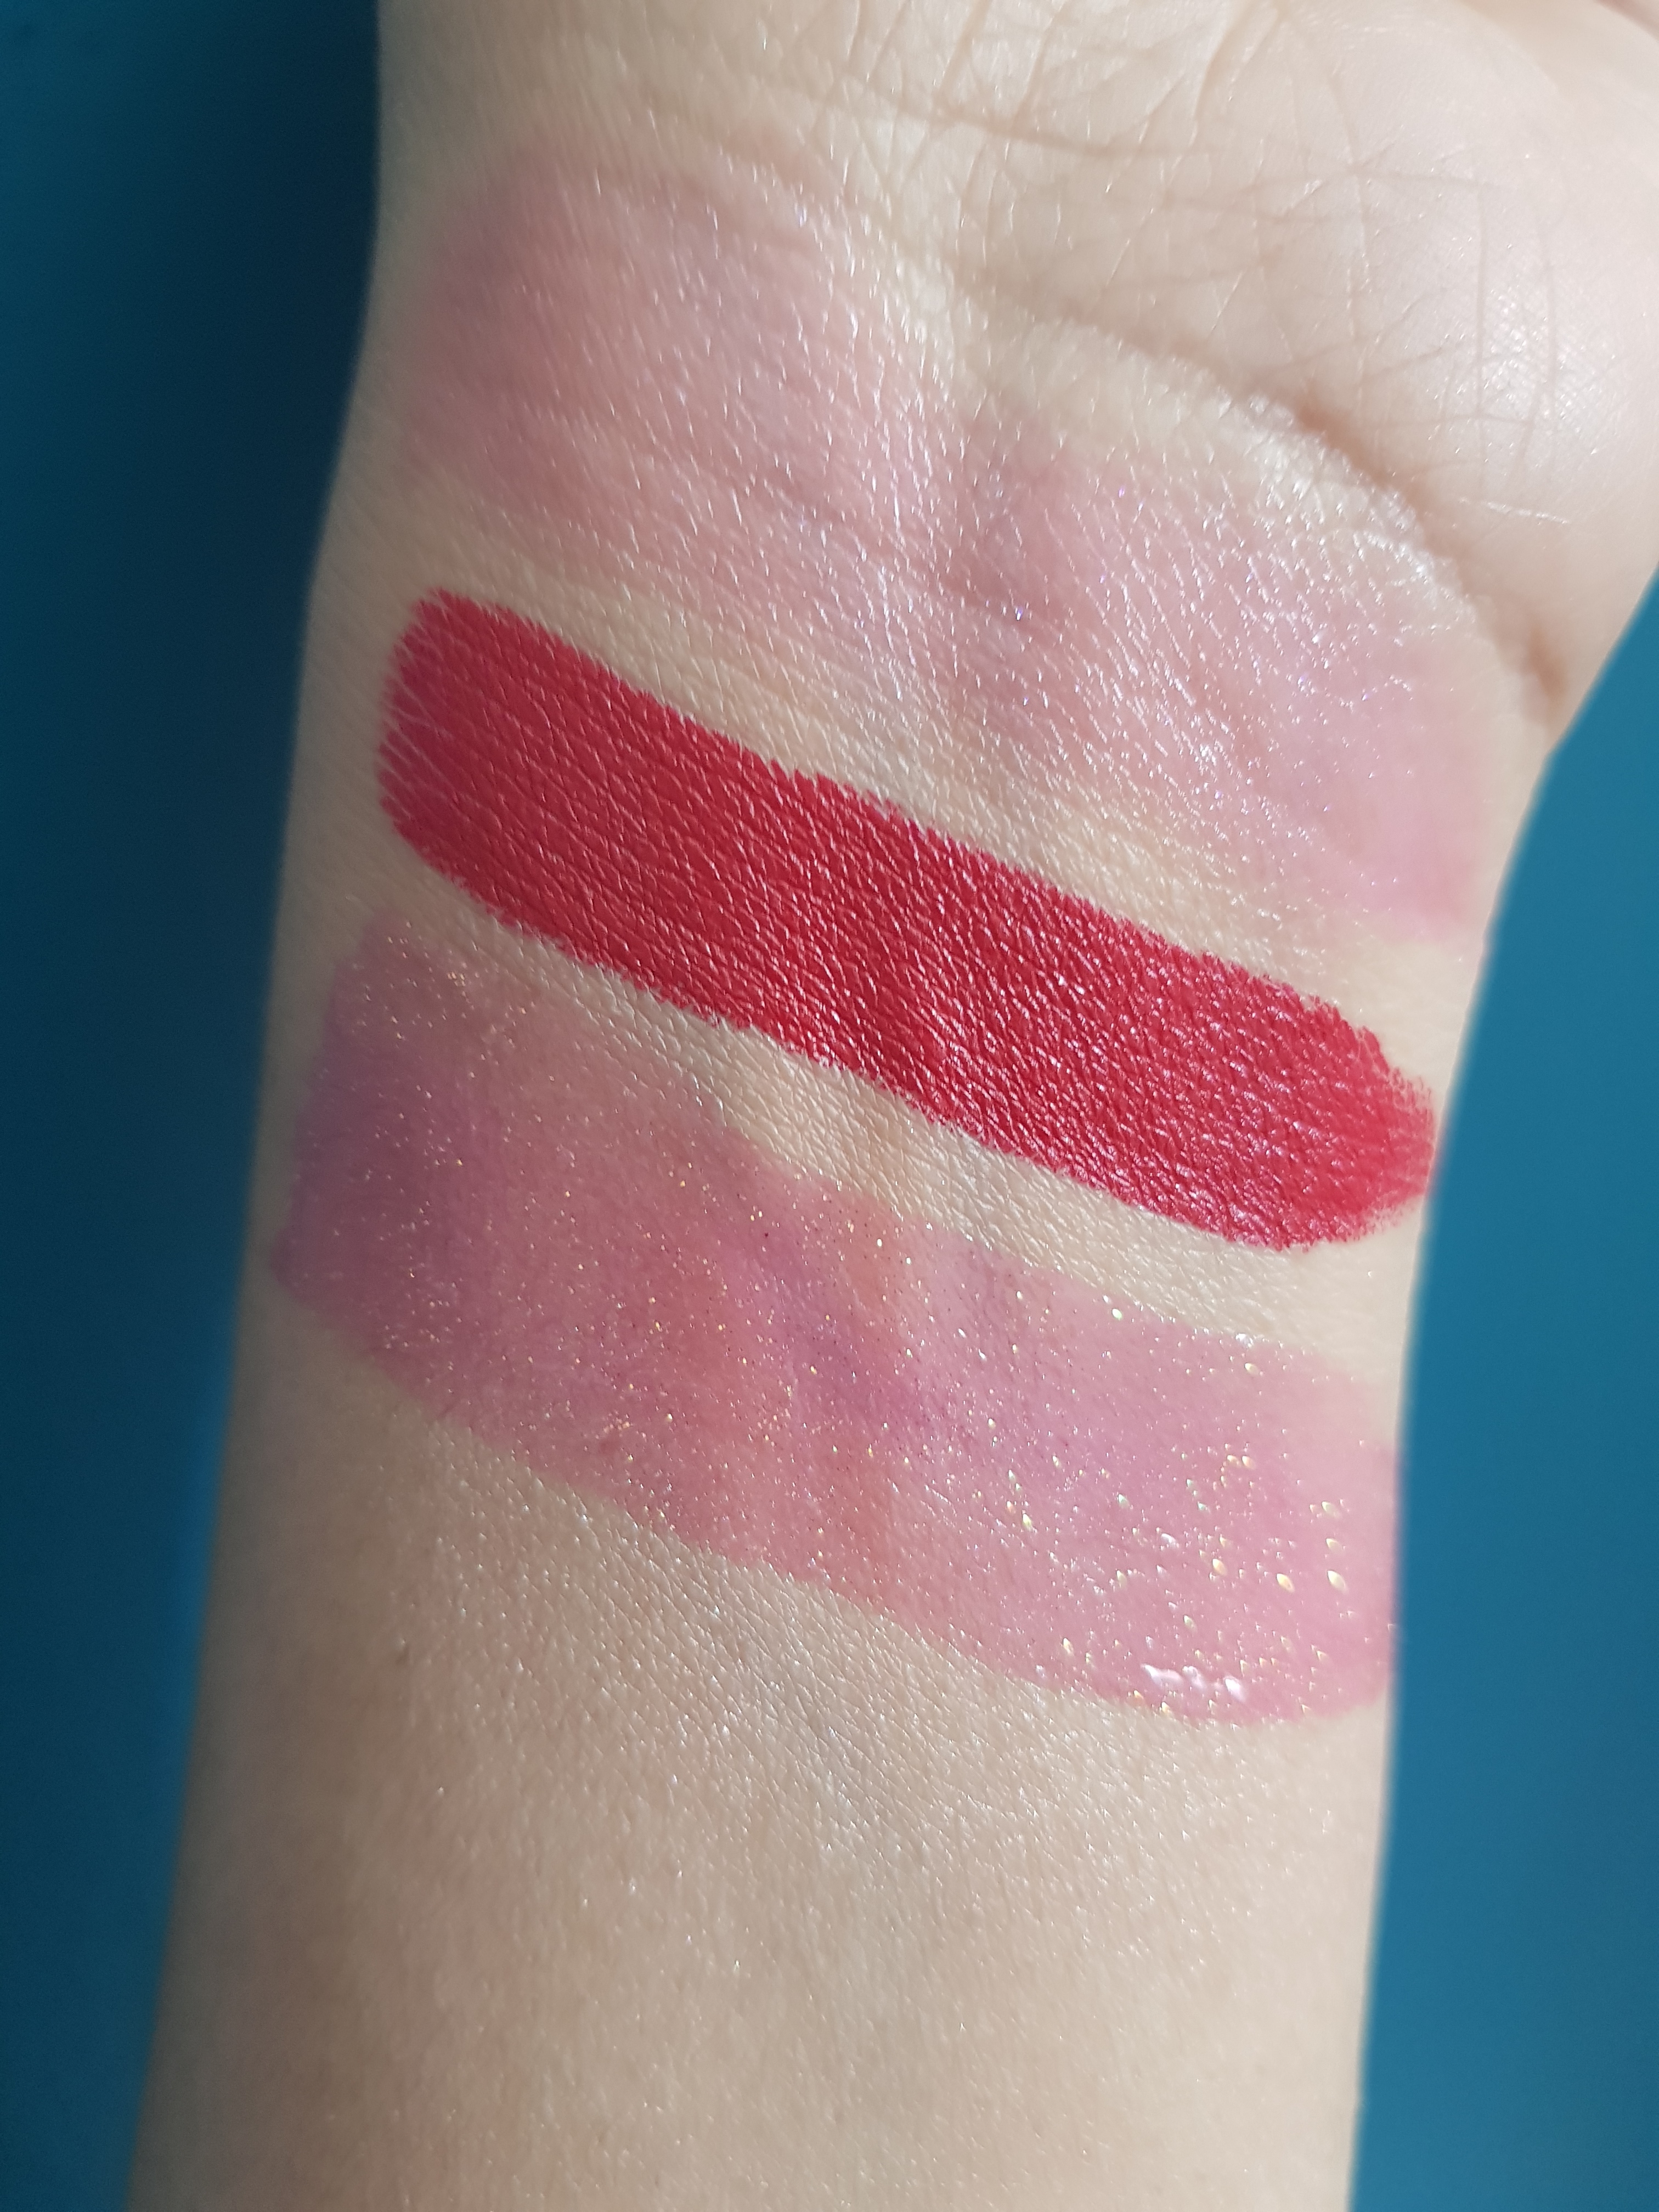 Winky Lux swatches (top to bottom): Glimmer Balm, Lip Velour in Heart, Disco Shine gloss - Hustle - Ms Tantrum Blog